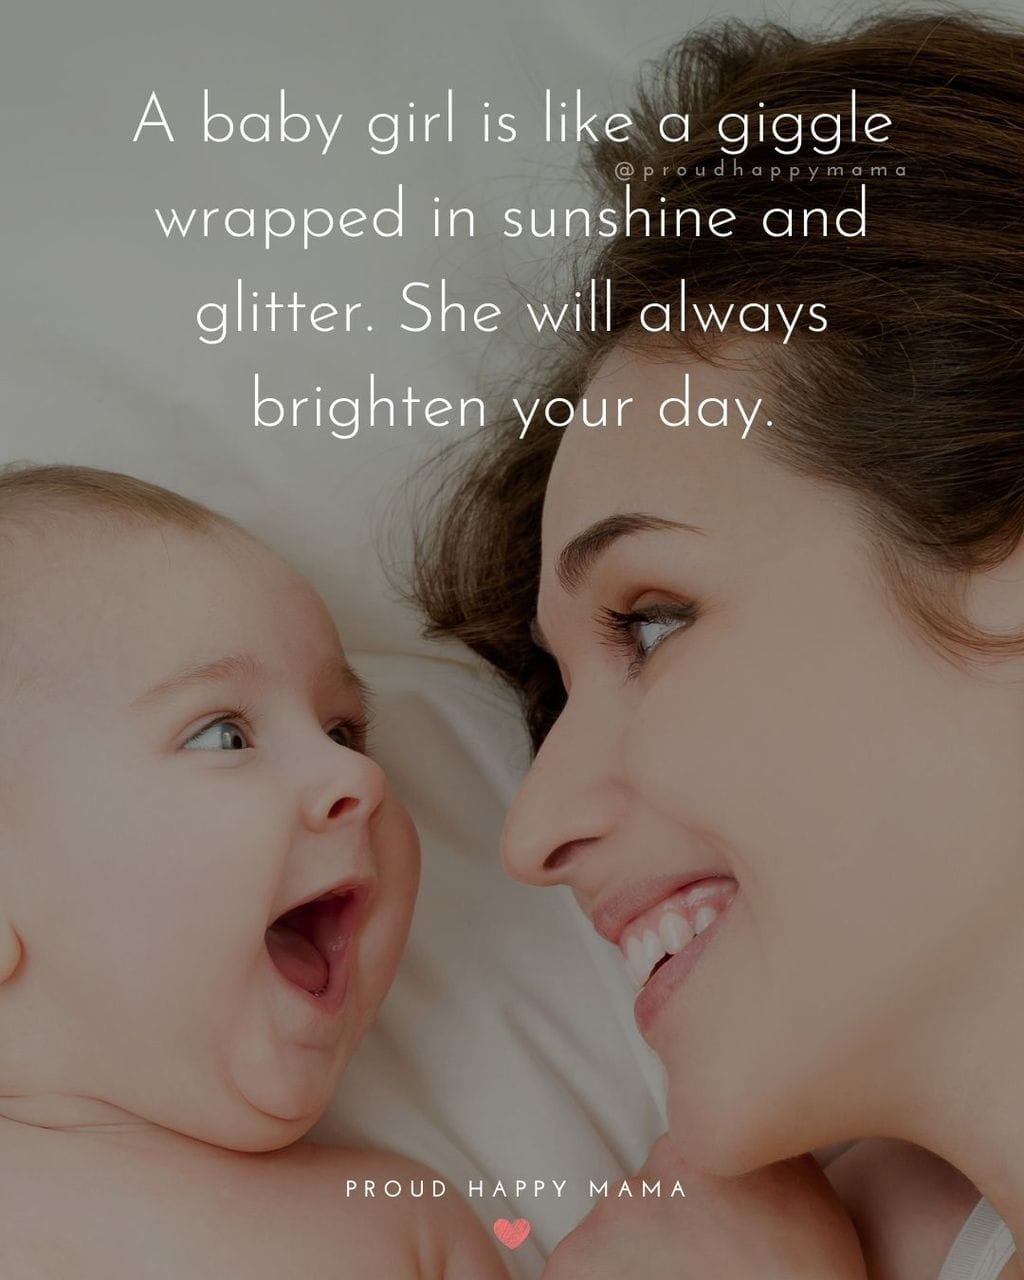 Baby Girl Quotes - A baby girl is like a giggle wrapped in sunshine and glitter. She will always brighten your day.